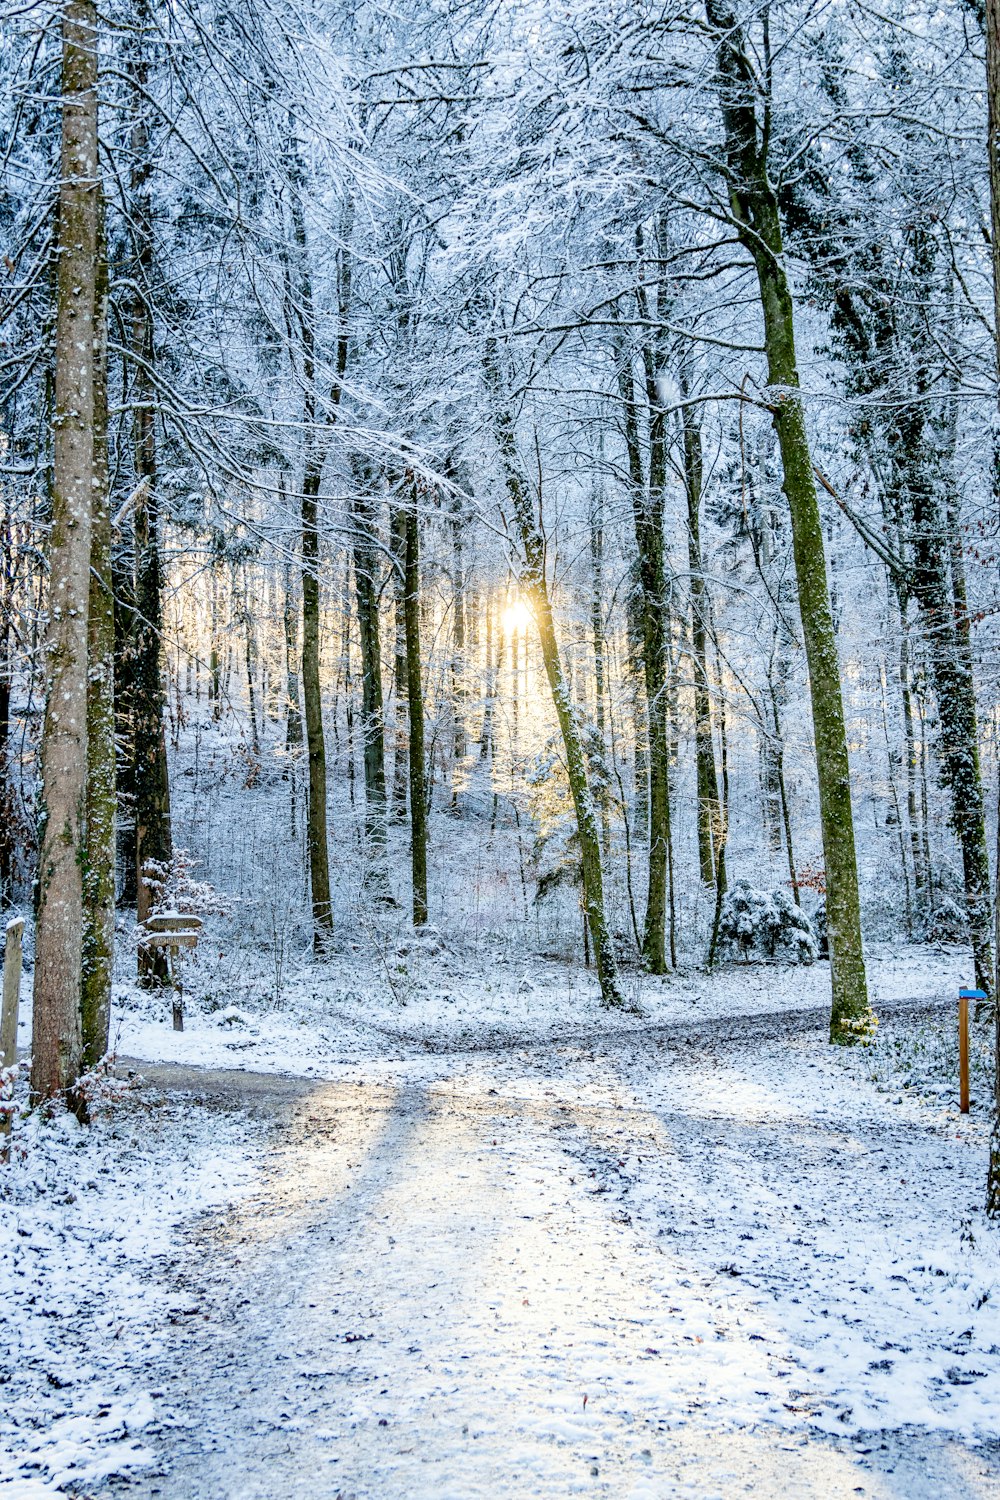 a snow covered road in a forest with trees